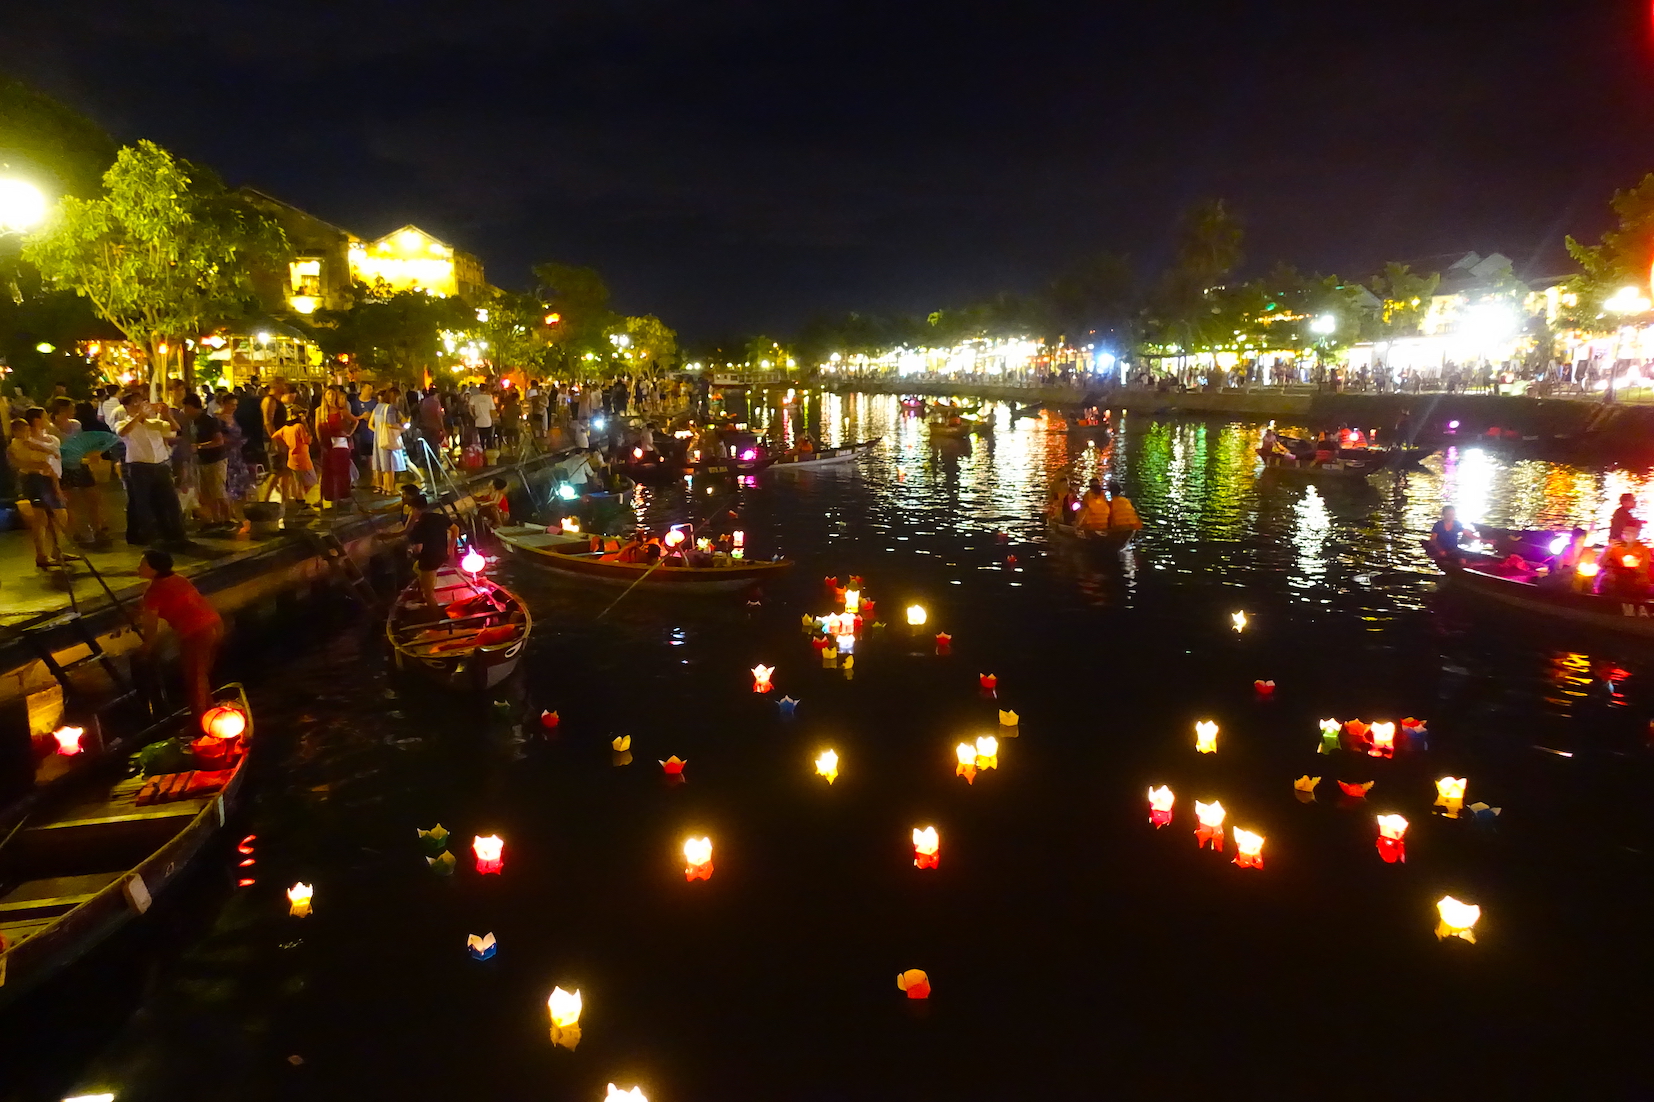 Lanterns floating in Hoi An at night